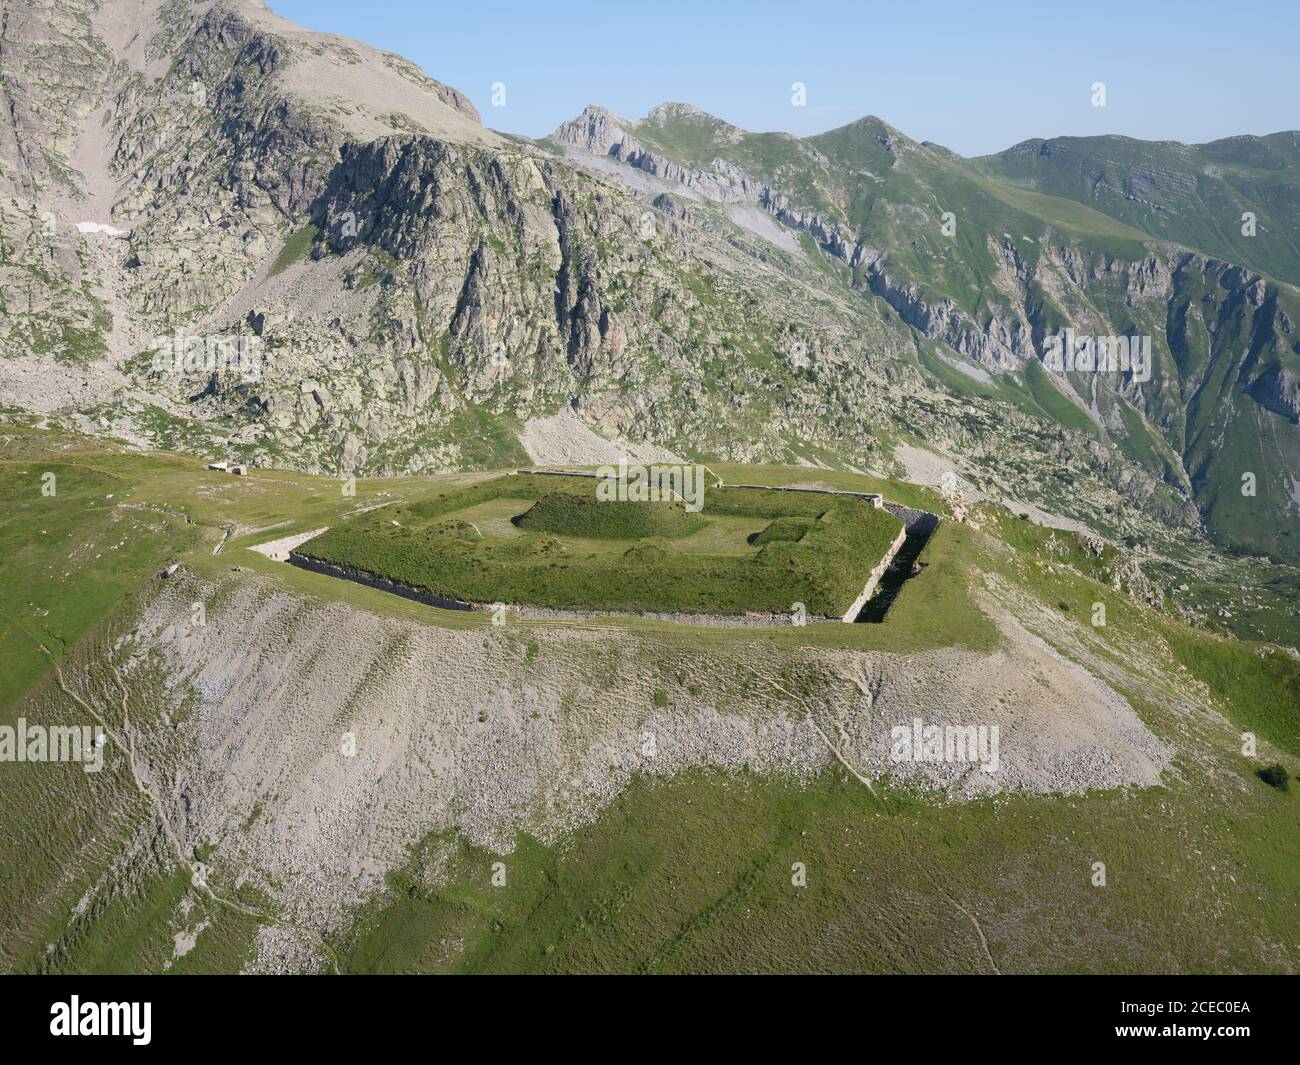 AERIAL VIEW. Fort de Giaure an old military fortification above Col de Tende.  Tende, Alpes-Maritimes, France Stock Photo - Alamy